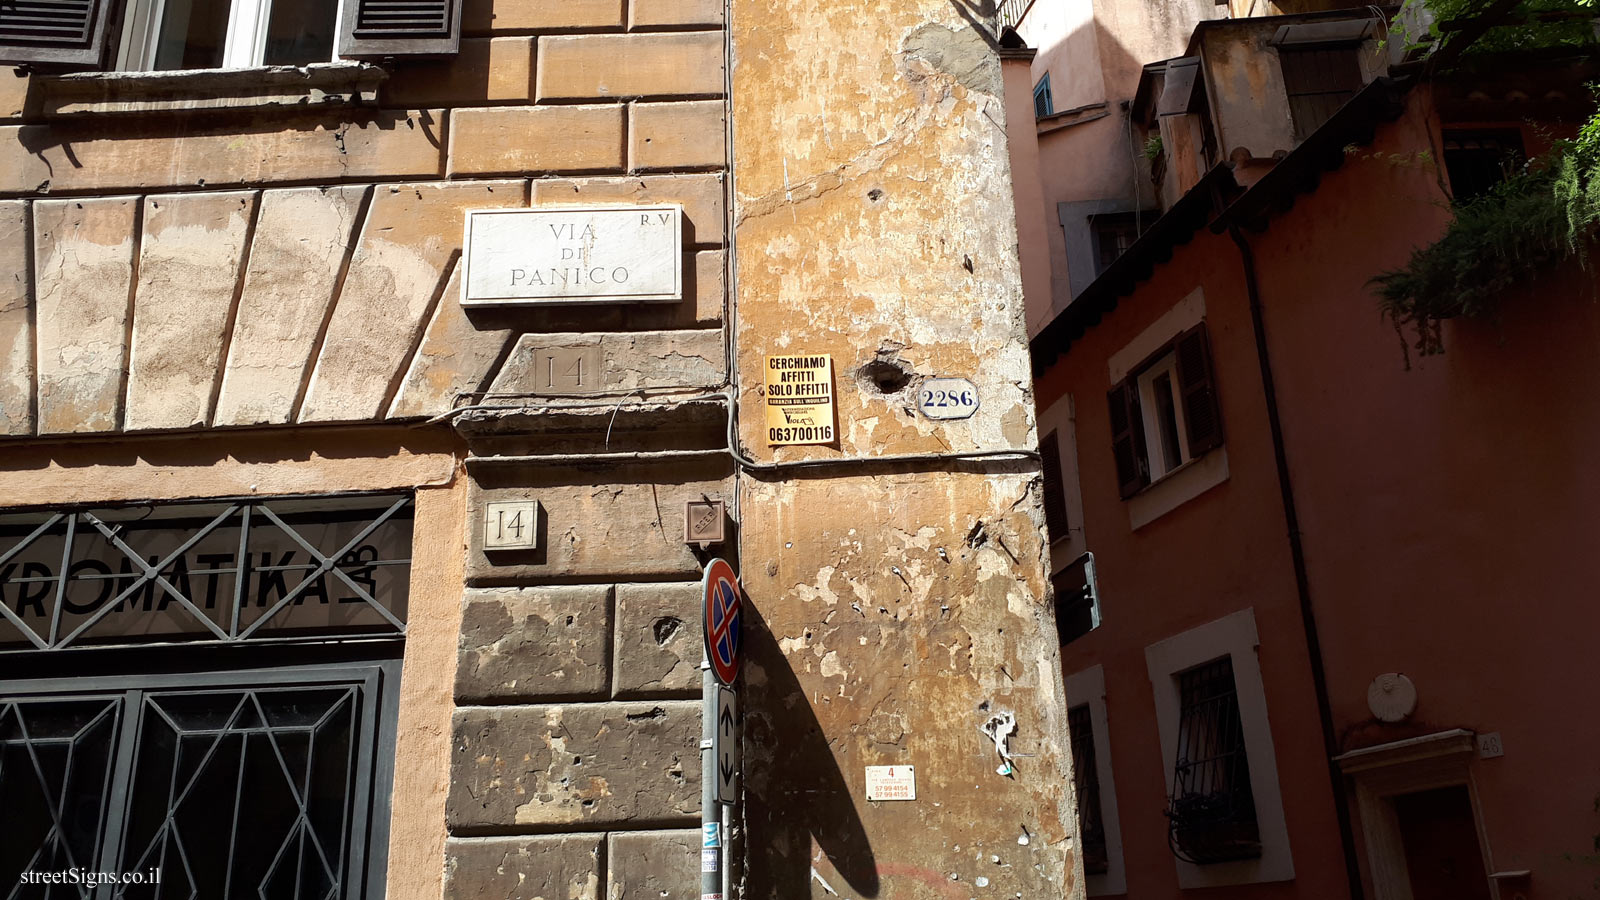 Rome - Via di Panico - A large number of signs